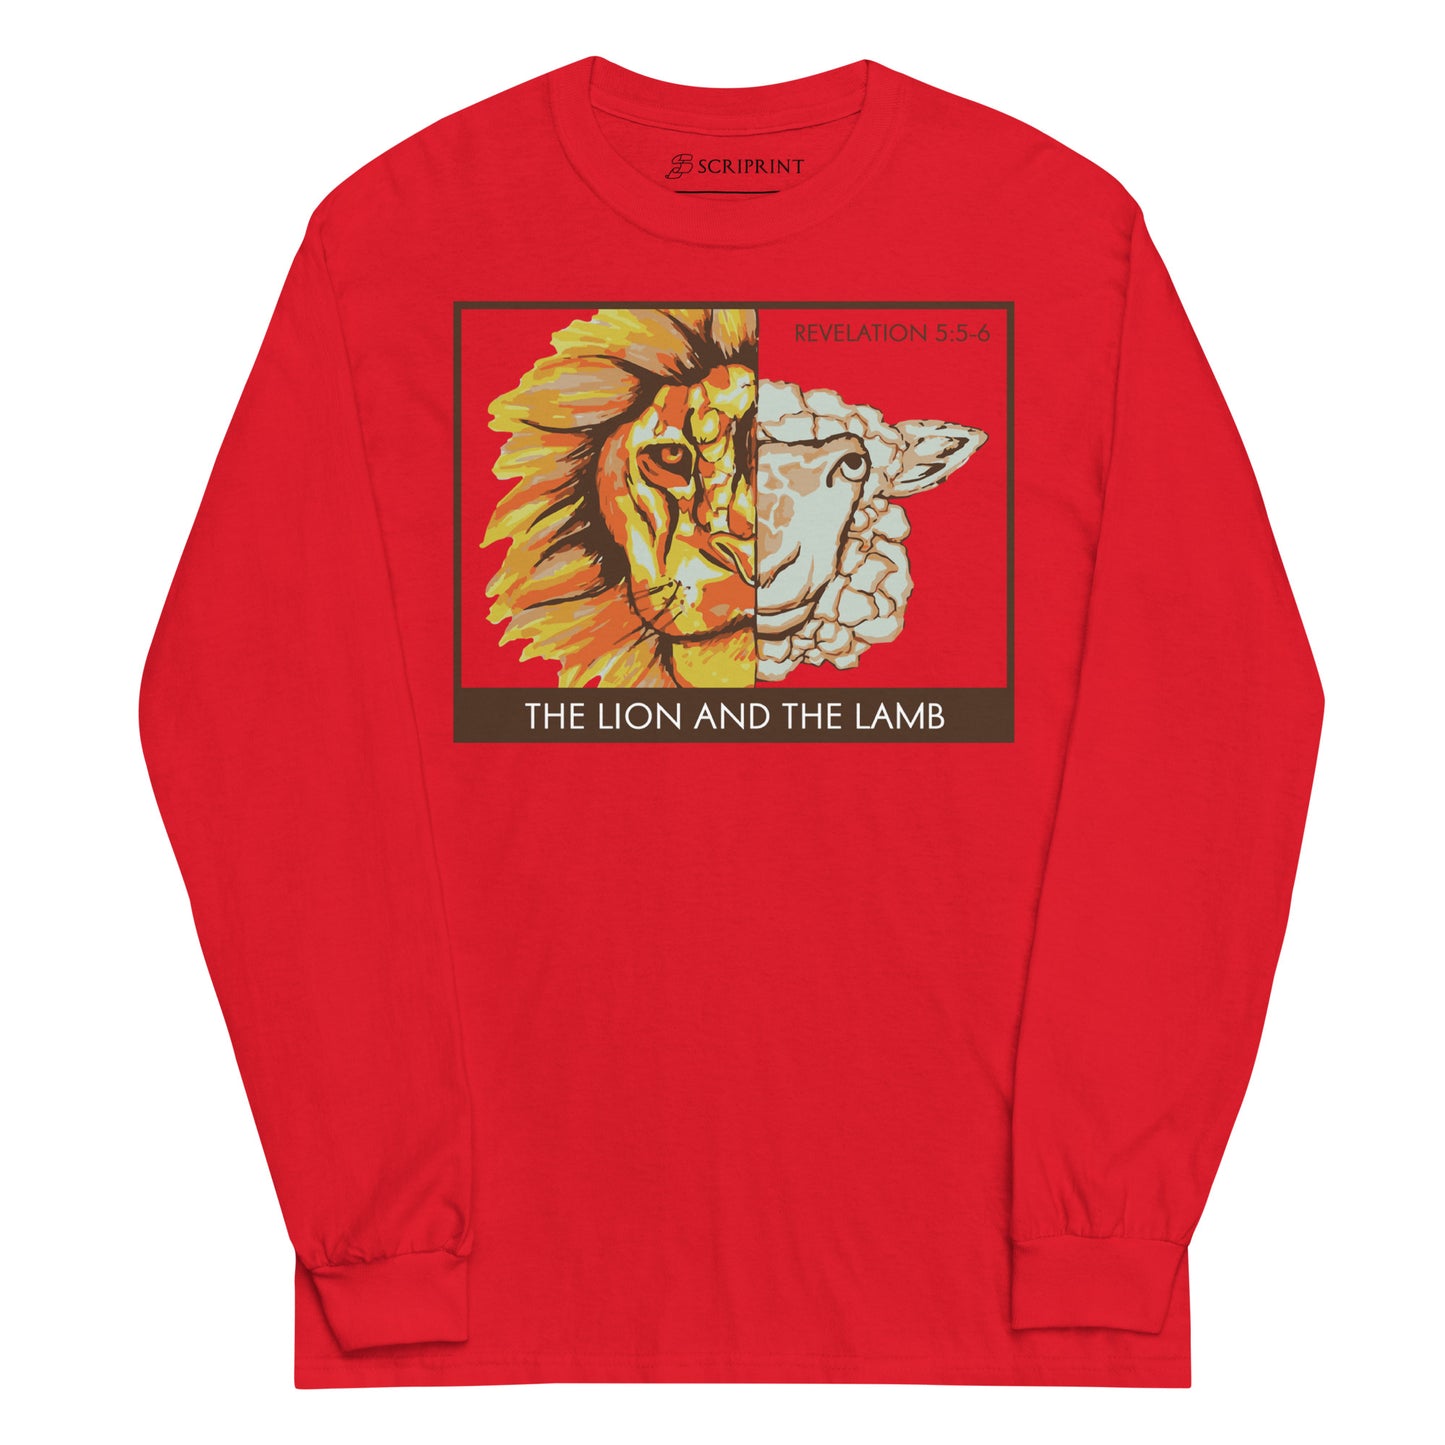 The Lion and the Lamb Men’s Long Sleeve Shirt